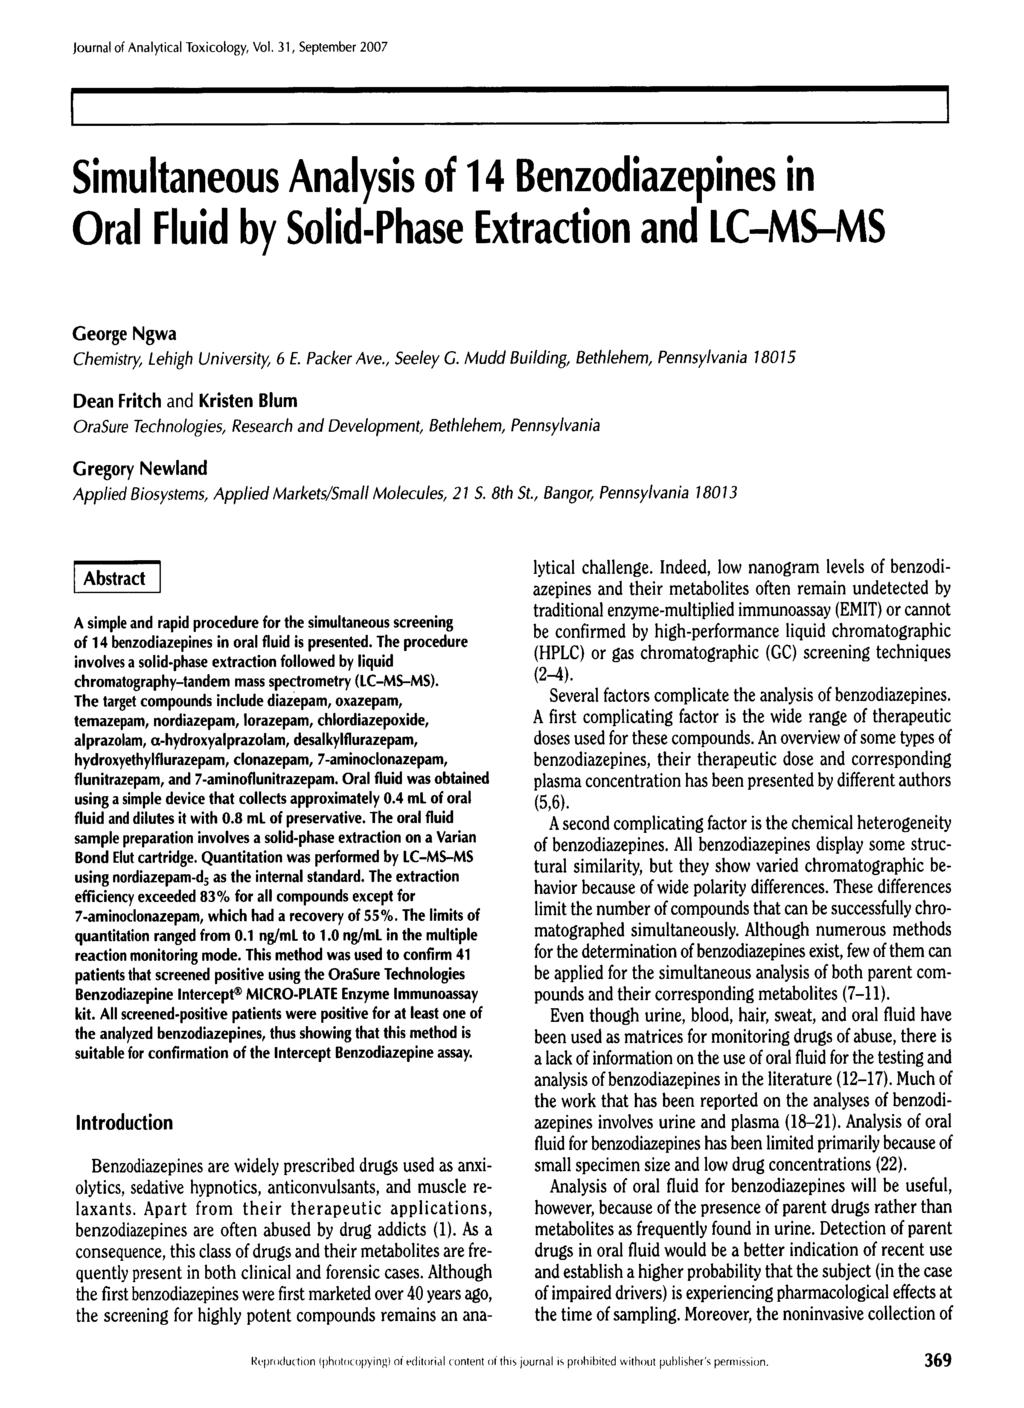 Simultaneous Analysis of 14 Benzodiazepines in Oral Fluid by Solid-Phase Extraction and LC-MS-MS George Ngwa Chemistry, Lehigh University, 6 E. Packer Ave., 5eeley G.